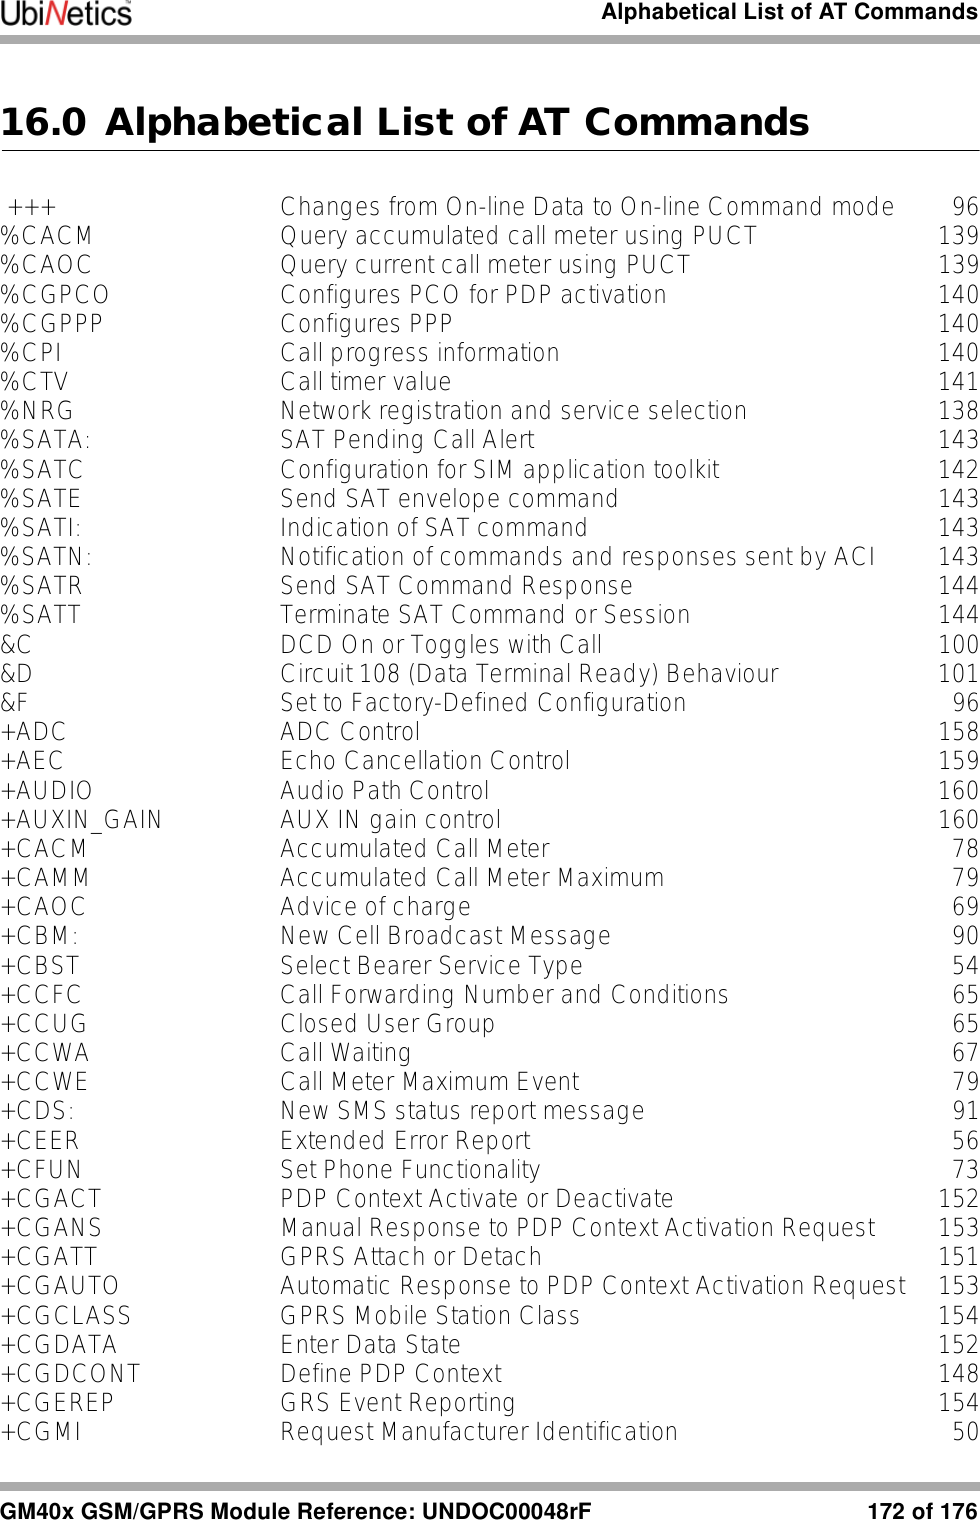 Alphabetical List of AT CommandsGM40x GSM/GPRS Module Reference: UNDOC00048rF 172 of 17616.0 Alphabetical List of AT Commands +++ Changes from On-line Data to On-line Command mode 96%CACM Query accumulated call meter using PUCT 139%CAOC Query current call meter using PUCT 139%CGPCO Configures PCO for PDP activation 140%CGPPP Configures PPP 140%CPI Call progress information 140%CTV Call timer value 141%NRG Network registration and service selection 138%SATA: SAT Pending Call Alert 143%SATC Configuration for SIM application toolkit 142%SATE Send SAT envelope command 143%SATI: Indication of SAT command 143%SATN: Notification of commands and responses sent by ACI 143%SATR Send SAT Command Response 144%SATT Terminate SAT Command or Session 144&amp;C DCD On or Toggles with Call 100&amp;D Circuit 108 (Data Terminal Ready) Behaviour 101&amp;F Set to Factory-Defined Configuration 96+ADC ADC Control 158+AEC Echo Cancellation Control 159+AUDIO Audio Path Control 160+AUXIN_GAIN AUX IN gain control 160+CACM Accumulated Call Meter 78+CAMM Accumulated Call Meter Maximum 79+CAOC Advice of charge 69+CBM: New Cell Broadcast Message 90+CBST Select Bearer Service Type 54+CCFC Call Forwarding Number and Conditions 65+CCUG Closed User Group 65+CCWA Call Waiting 67+CCWE Call Meter Maximum Event 79+CDS: New SMS status report message 91+CEER Extended Error Report 56+CFUN Set Phone Functionality 73+CGACT PDP Context Activate or Deactivate 152+CGANS Manual Response to PDP Context Activation Request 153+CGATT GPRS Attach or Detach 151+CGAUTO Automatic Response to PDP Context Activation Request 153+CGCLASS GPRS Mobile Station Class 154+CGDATA Enter Data State 152+CGDCONT Define PDP Context 148+CGEREP GRS Event Reporting 154+CGMI Request Manufacturer Identification 50